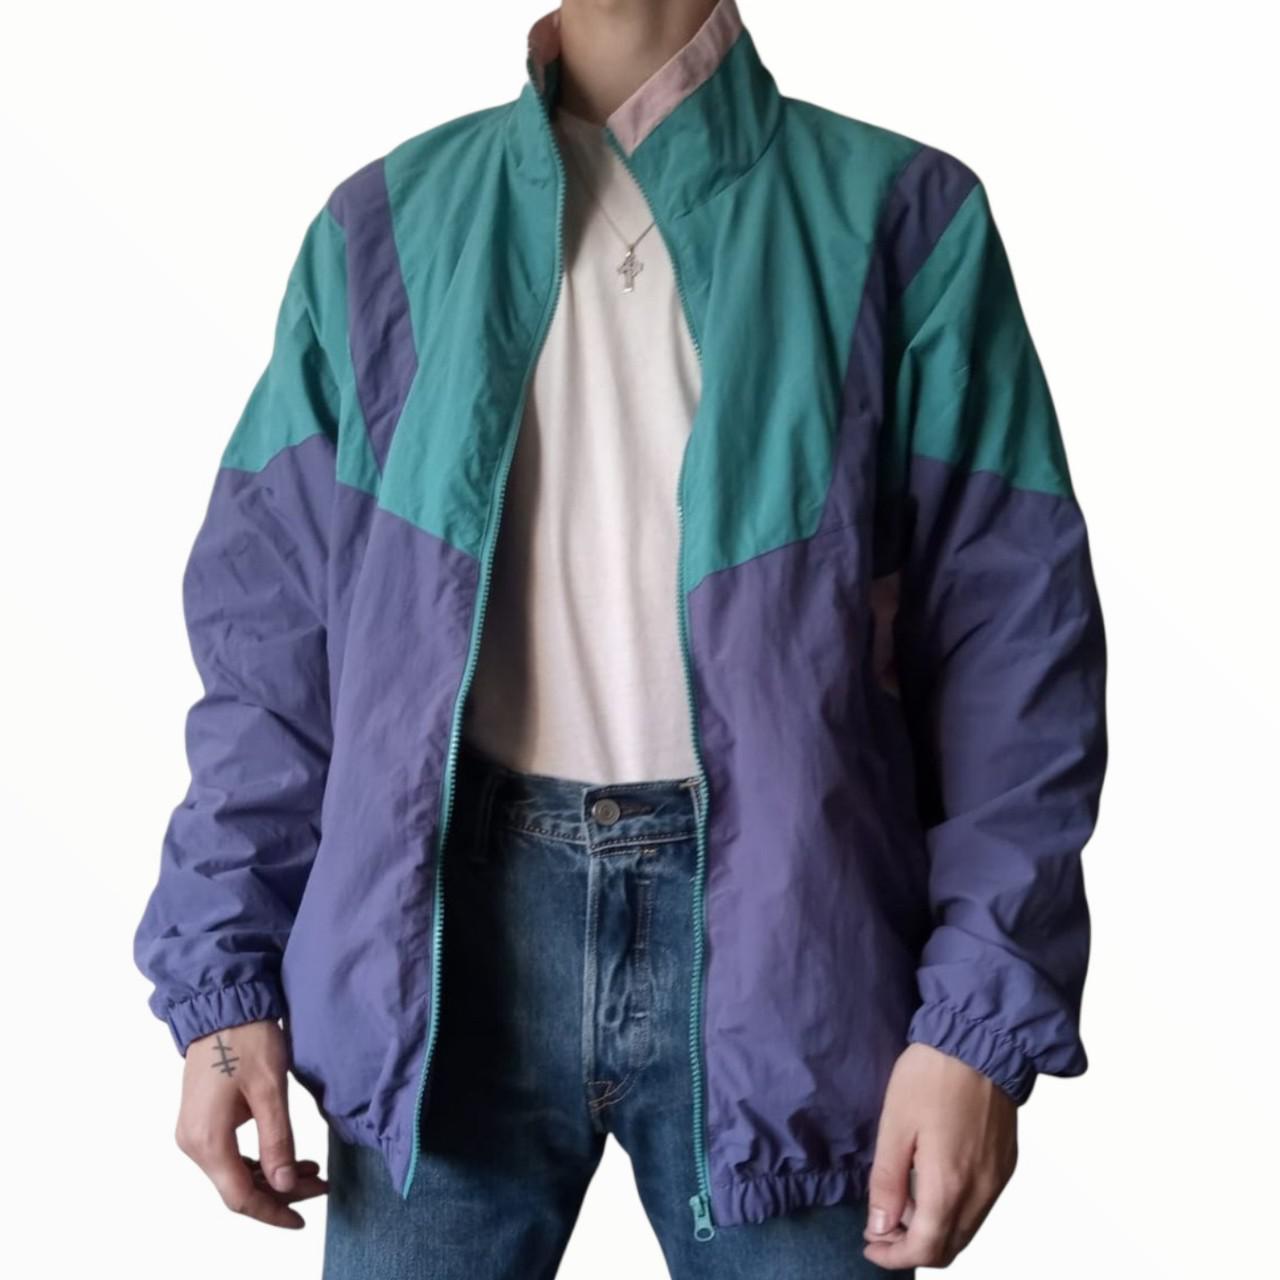 Retro Primark shell jacket in purple, teal and baby... - Depop